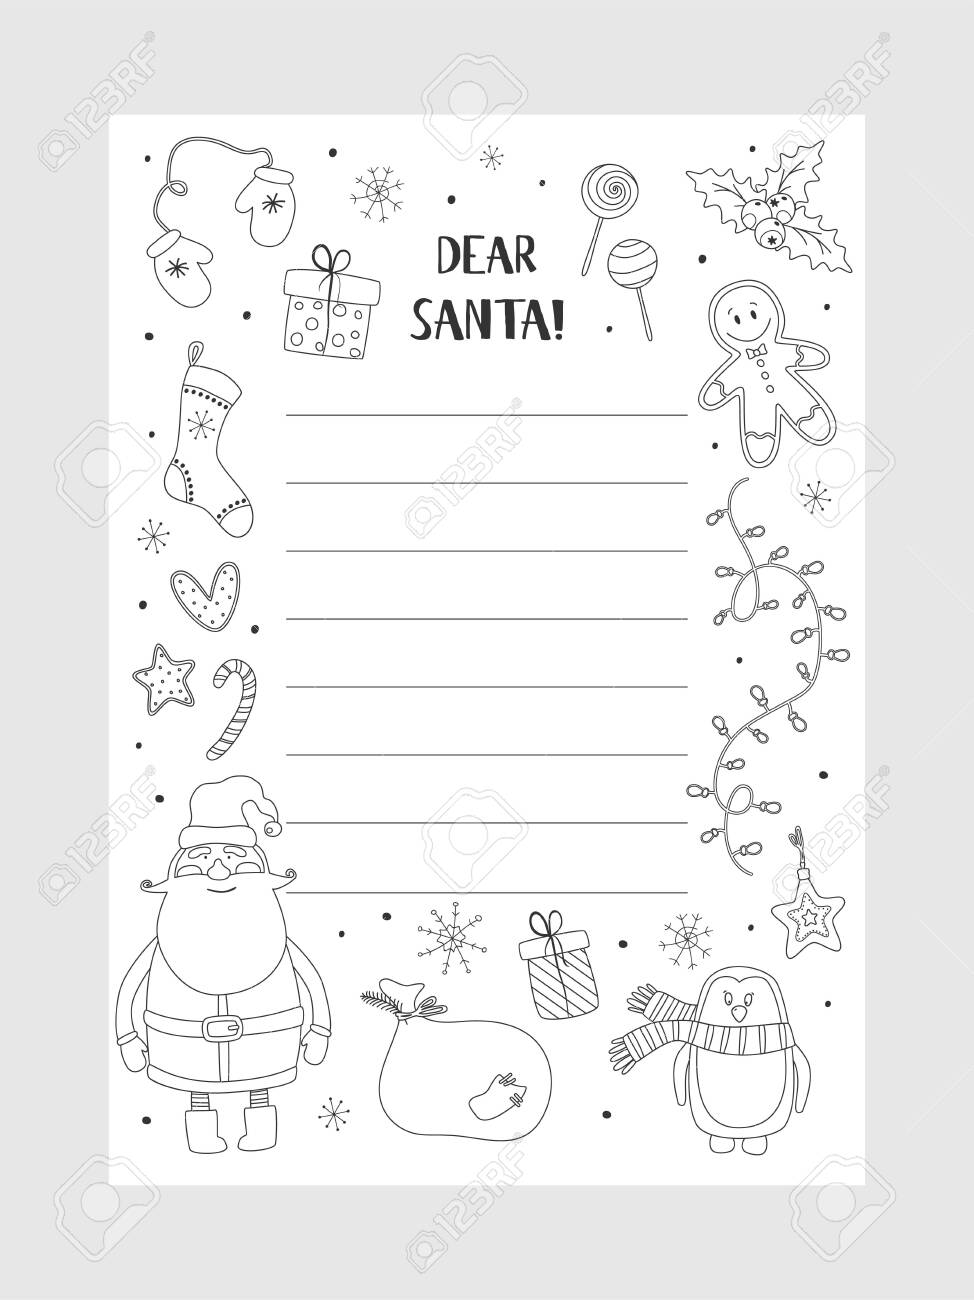 Cartoon christmas wish christmas items coloring page a letter to santa claus template christmas background with a place for christmas gifts for santa wish list vector illustration royalty free svg cliparts vectors